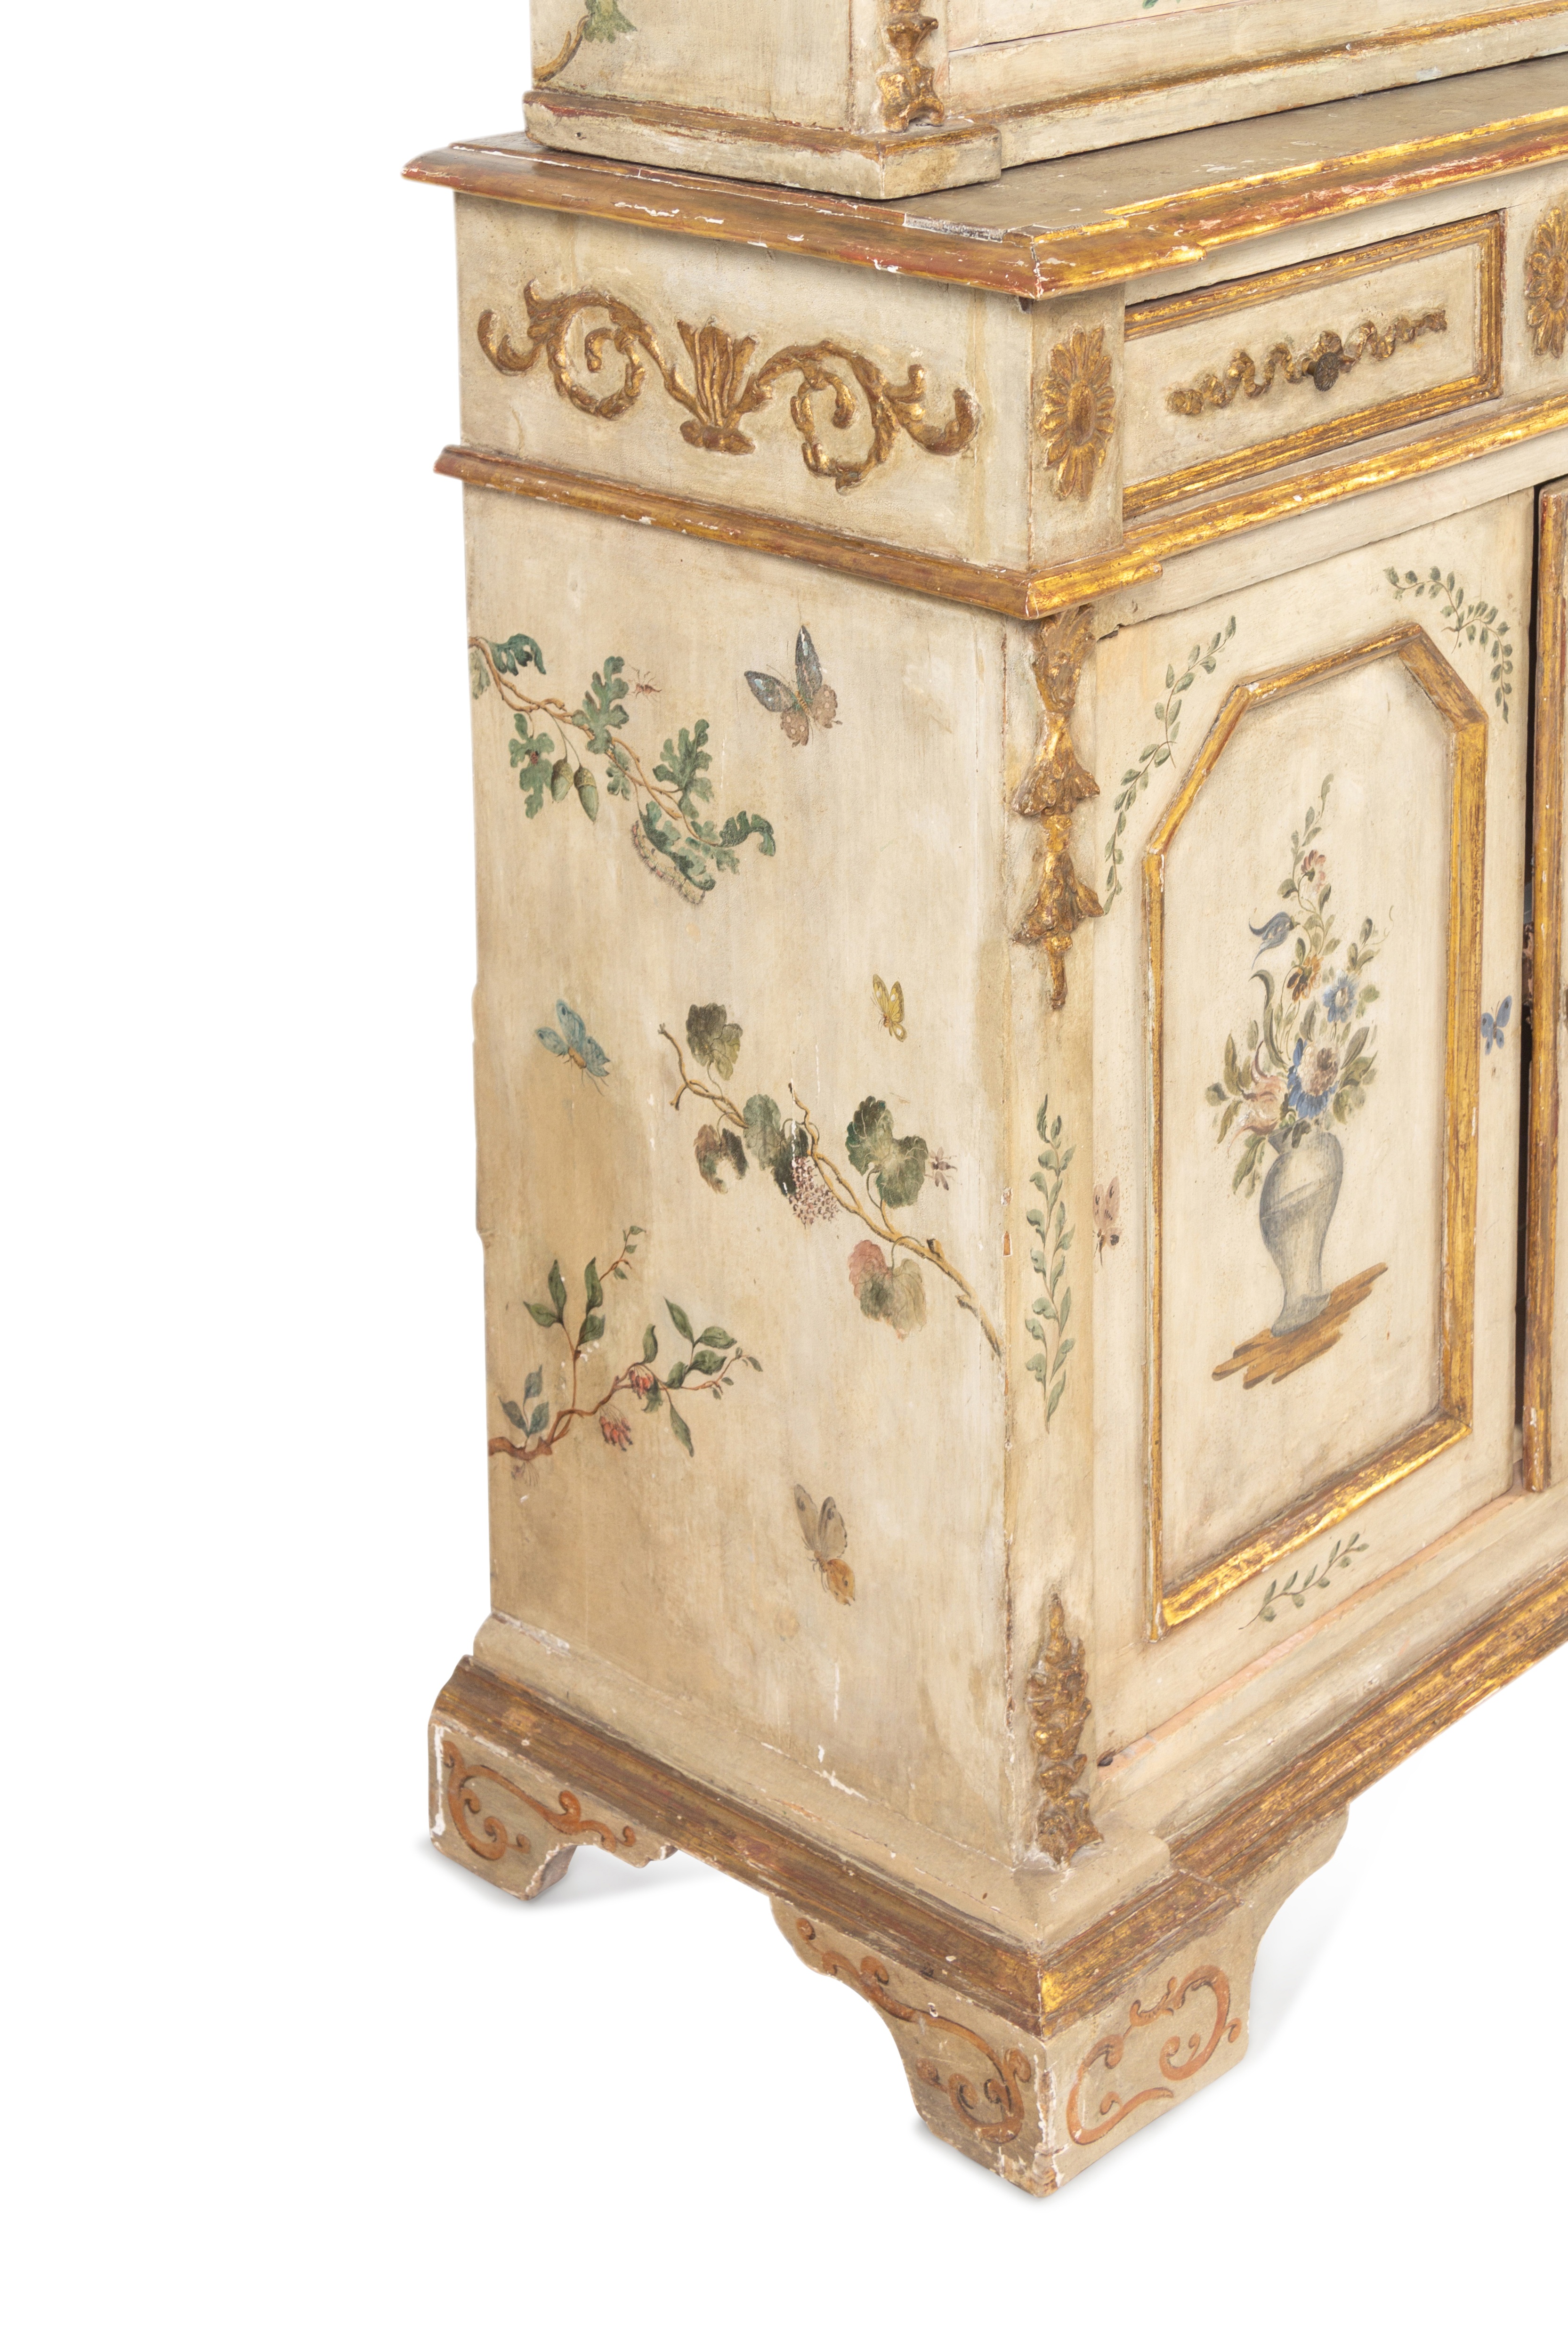 An Italian Polychrome and Cream-Painted and Parcel-Gilt Cabinet - Image 9 of 15